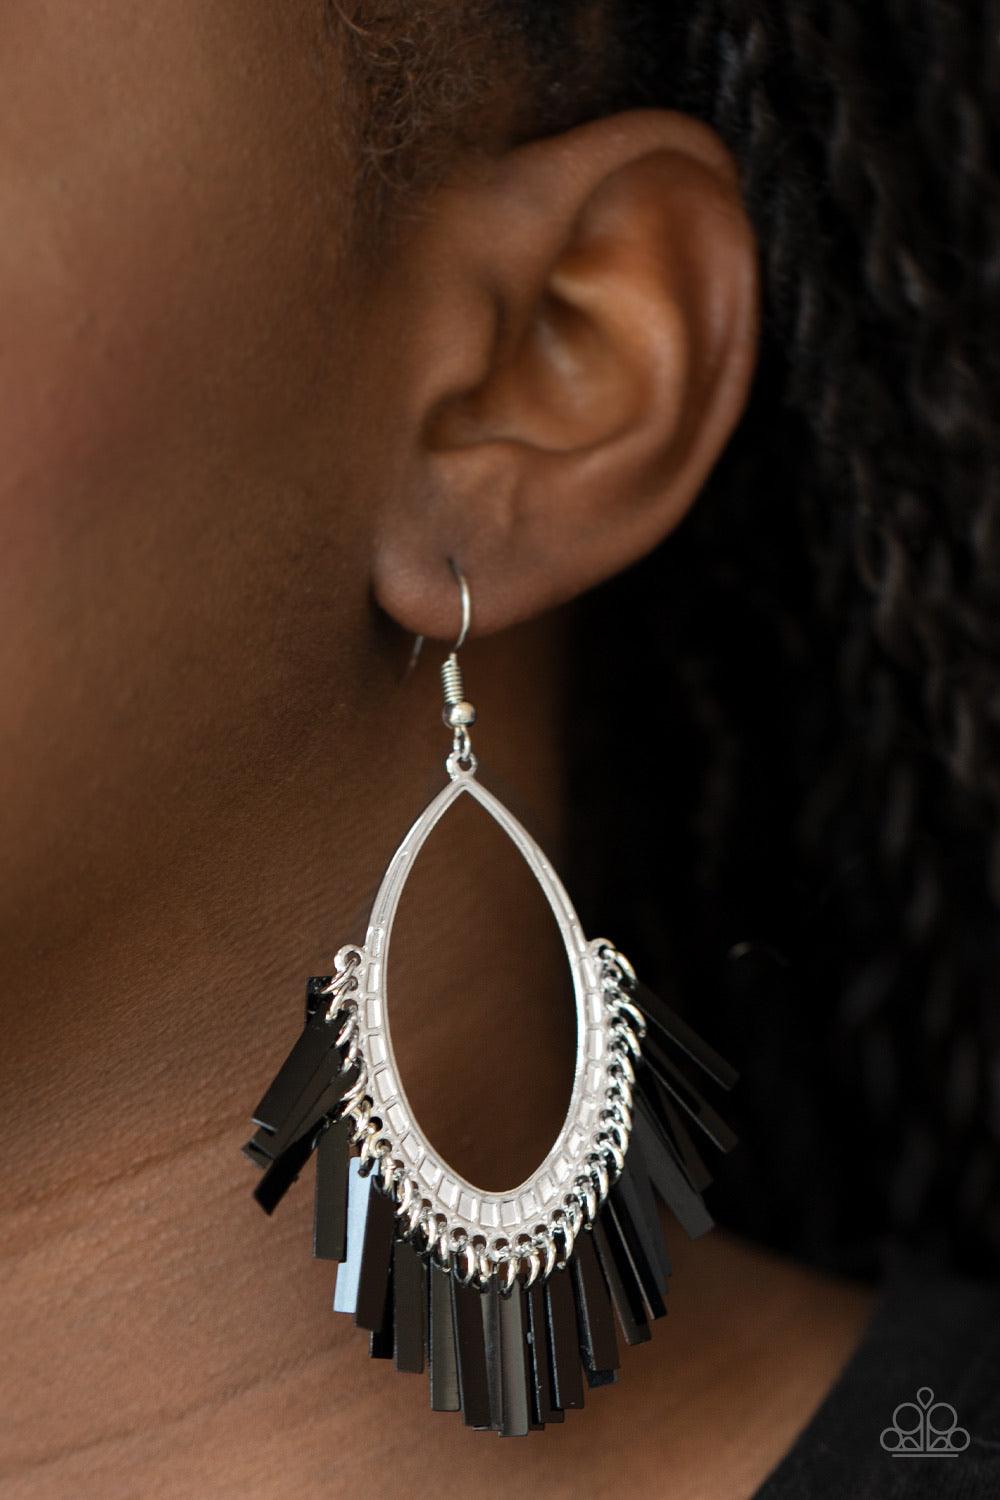 Paparazzi Accessories Fine-Tuned Machine - Black Featuring a shiny black metallic finish, flat rectangular rods dangle from the bottom of a textured silver frame, creating an edgy fringe. Earring attaches to a standard fishhook fitting. Sold as one pair o